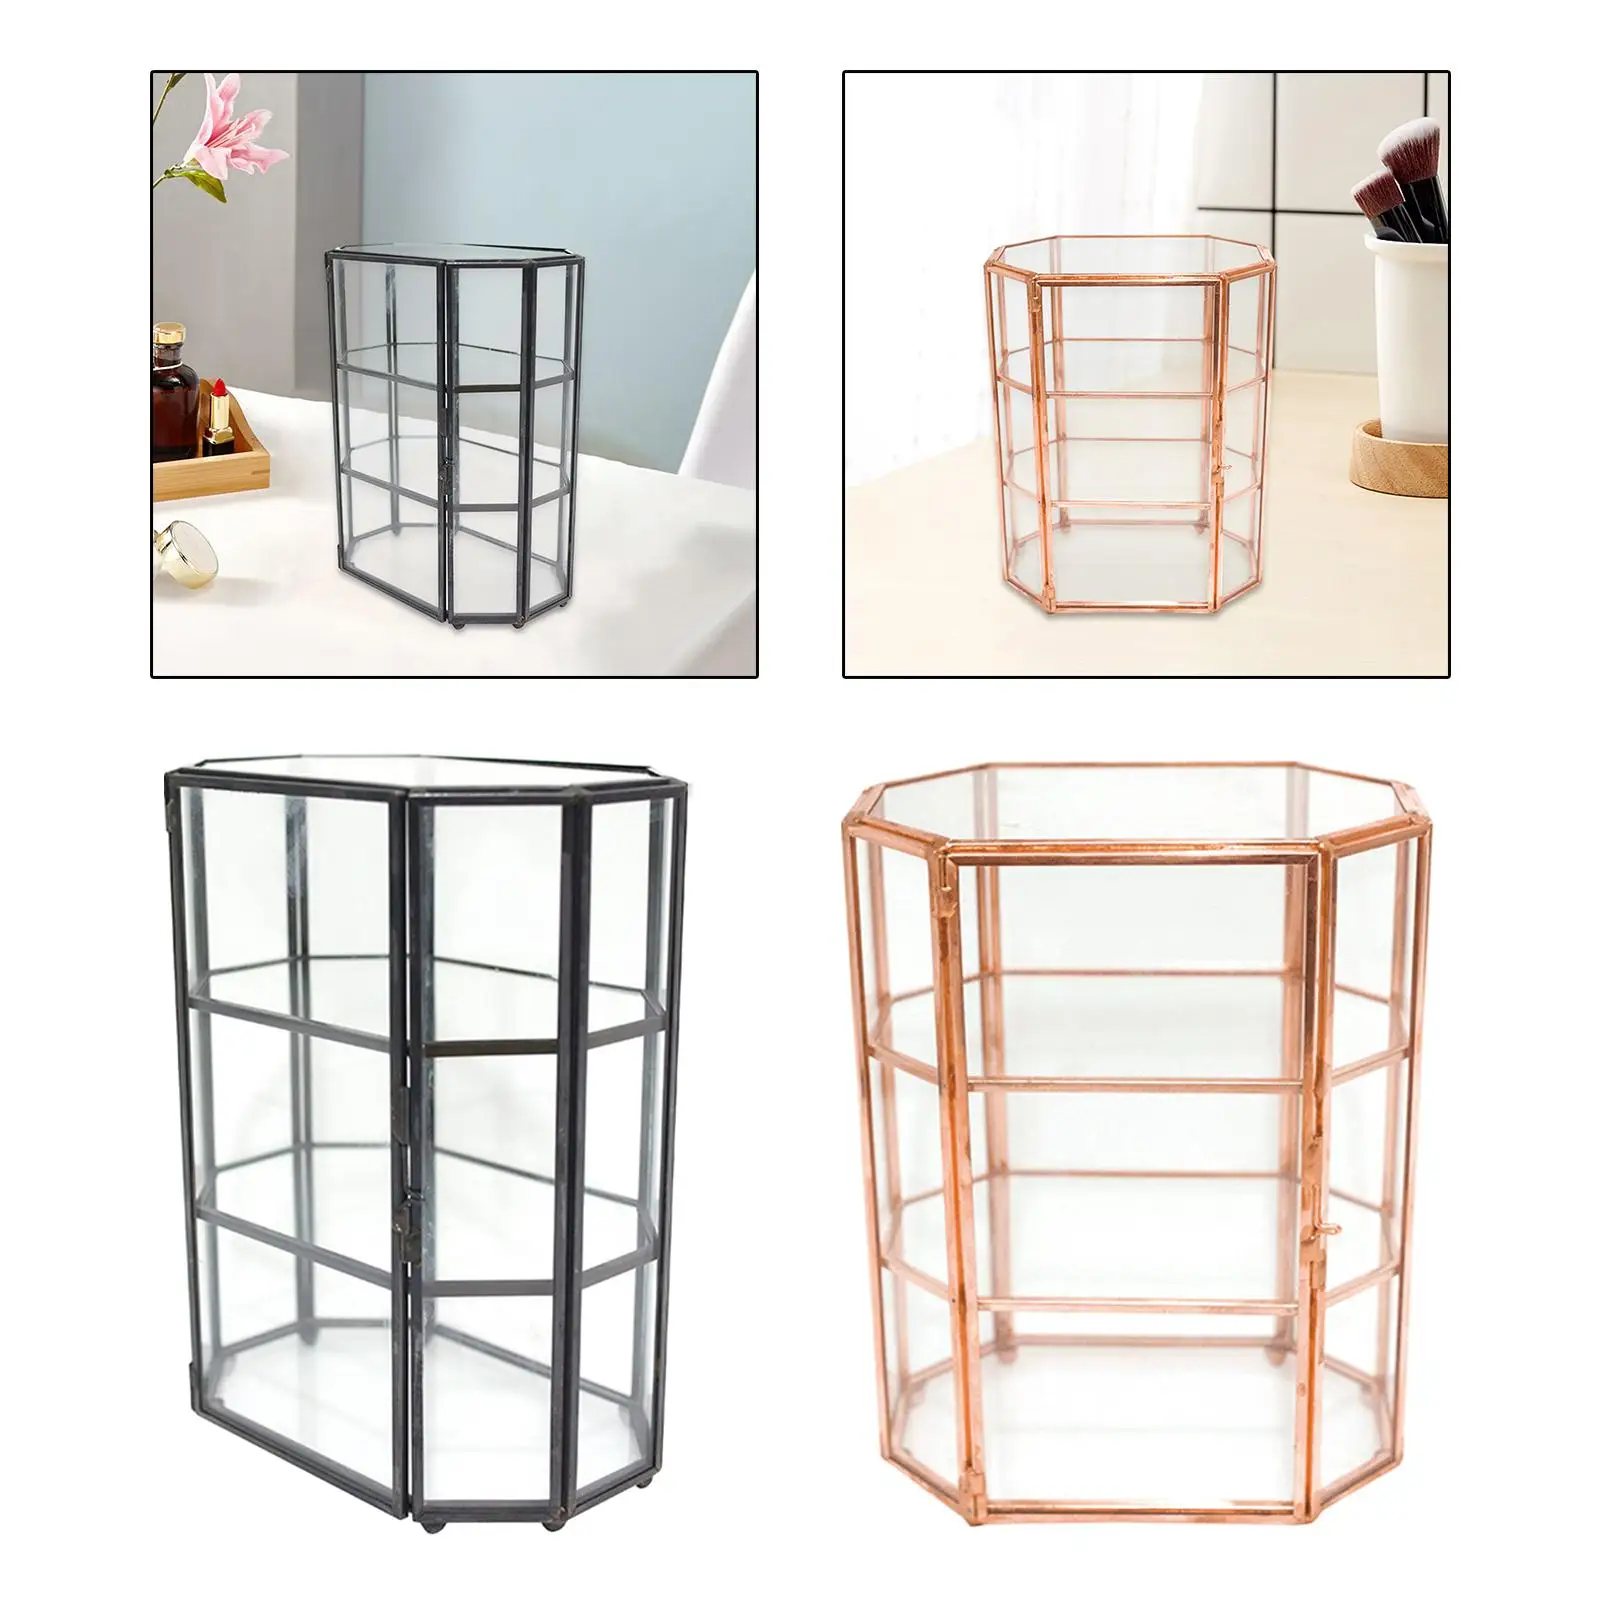 Glass Jewelry Box Storage Terrarium Christmas Gifts Countertop Vanity Lidded Box Home Decor for Rings Anklet Bracelet Earring